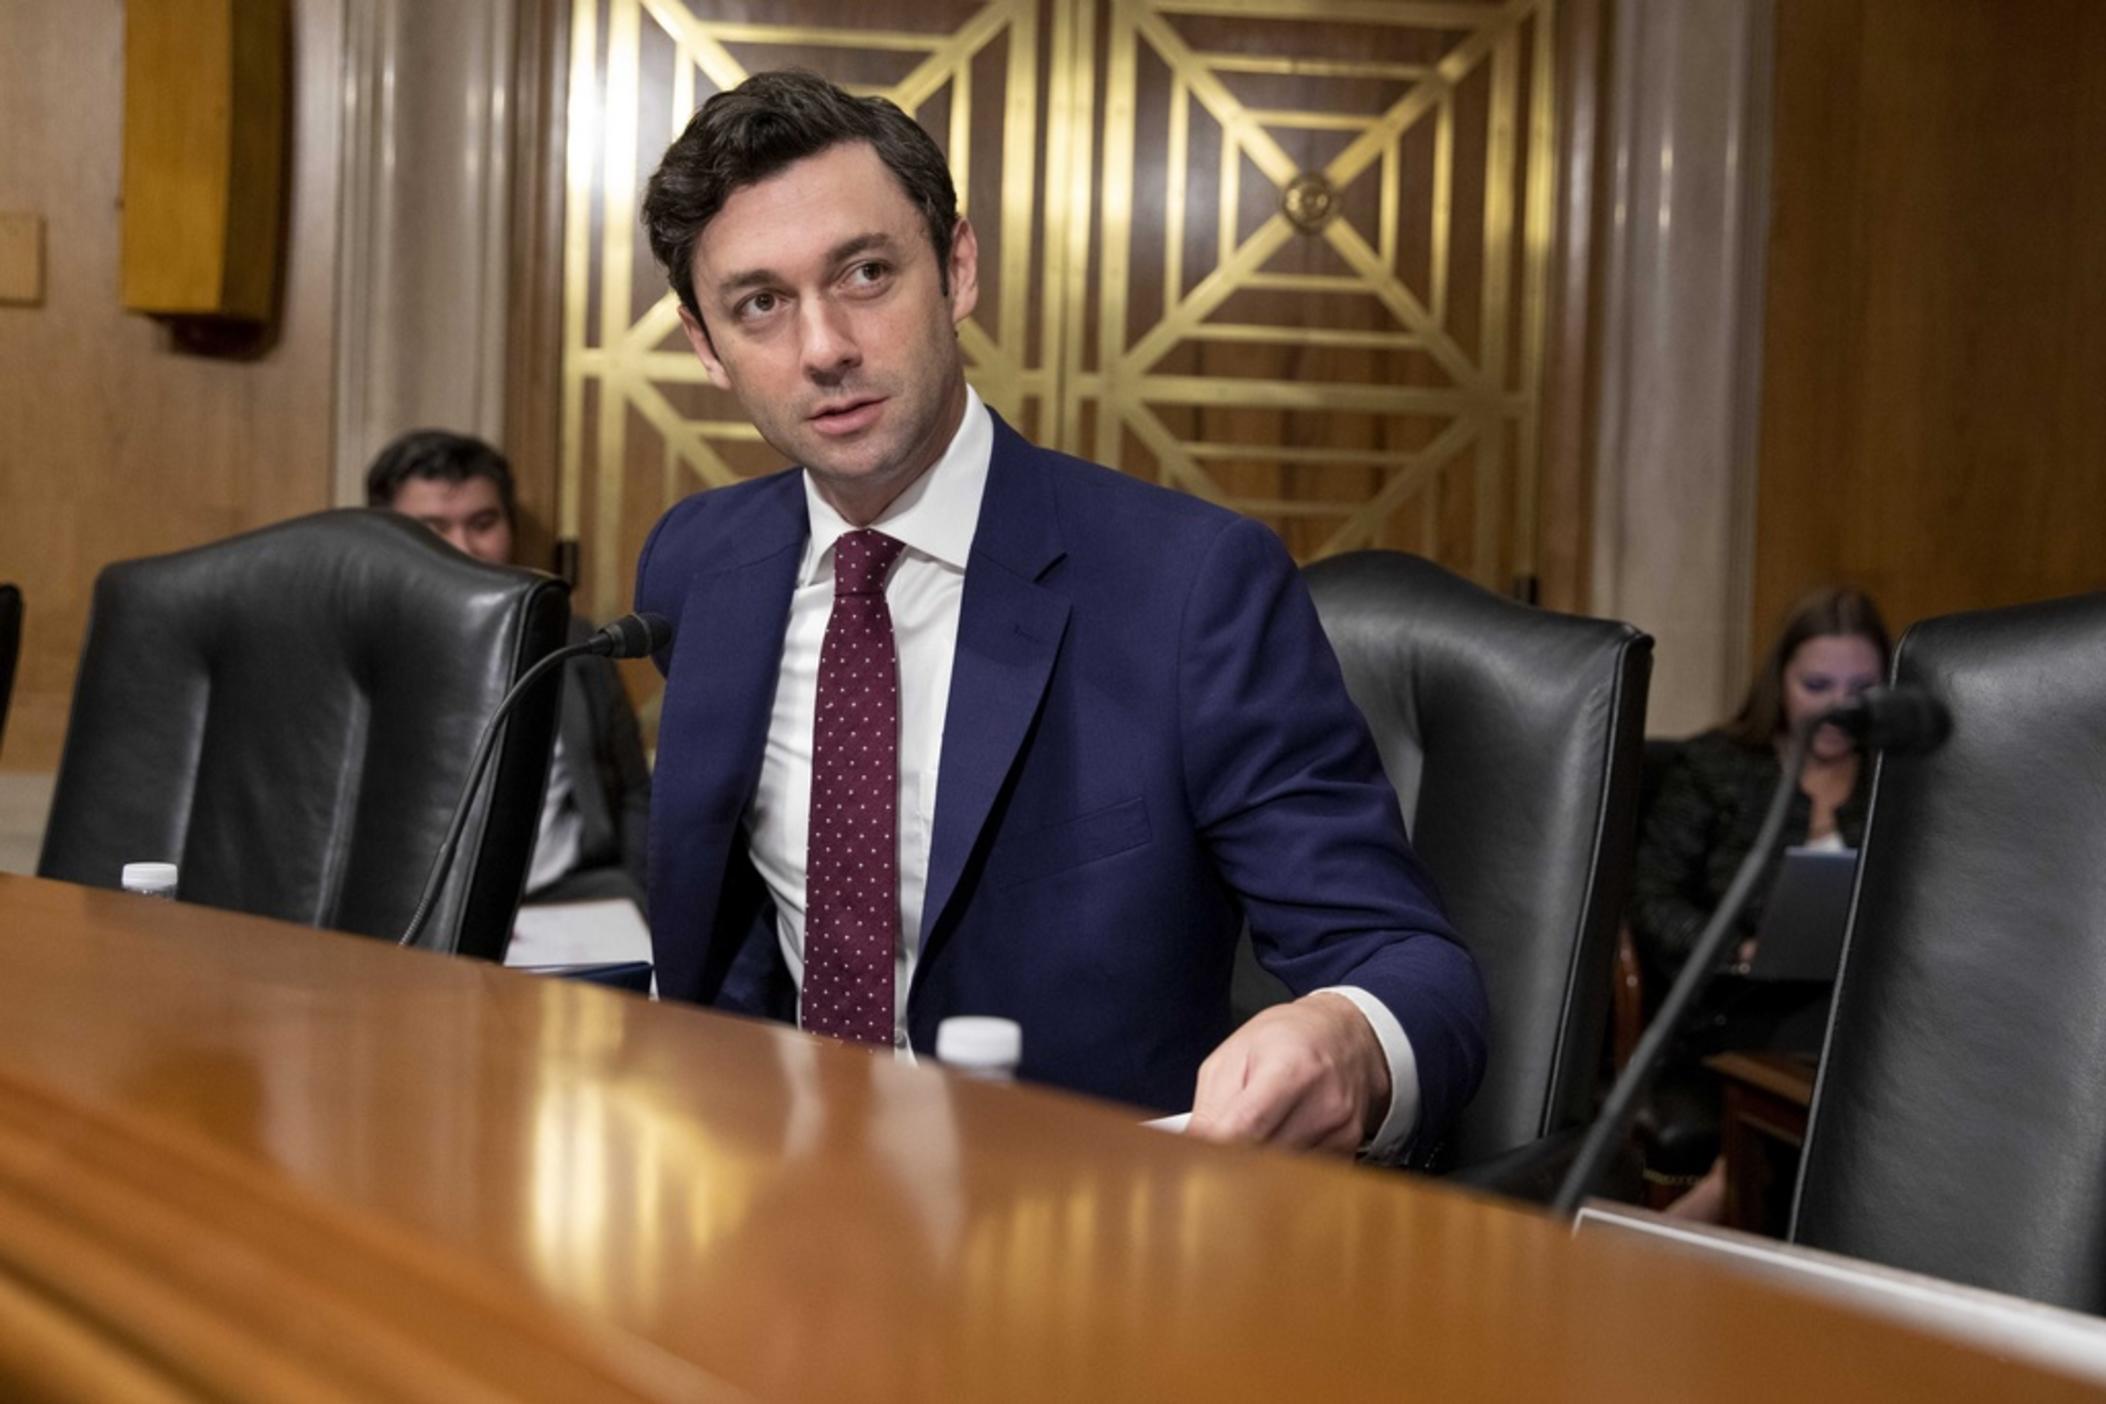 Sen. Jon Ossoff, D-Ga., arrives before a subcommittee hearing, Sept. 13, 2023, on Capitol Hill in Washington. During a subcommittee hearing on Monday, Oct. 30, chaired by Ossoff in Atlanta, two Georgia juvenile court judges said the head of the state's child welfare agency asked judges in an August meeting to illegally jail foster children while officials looked for other places to house them.